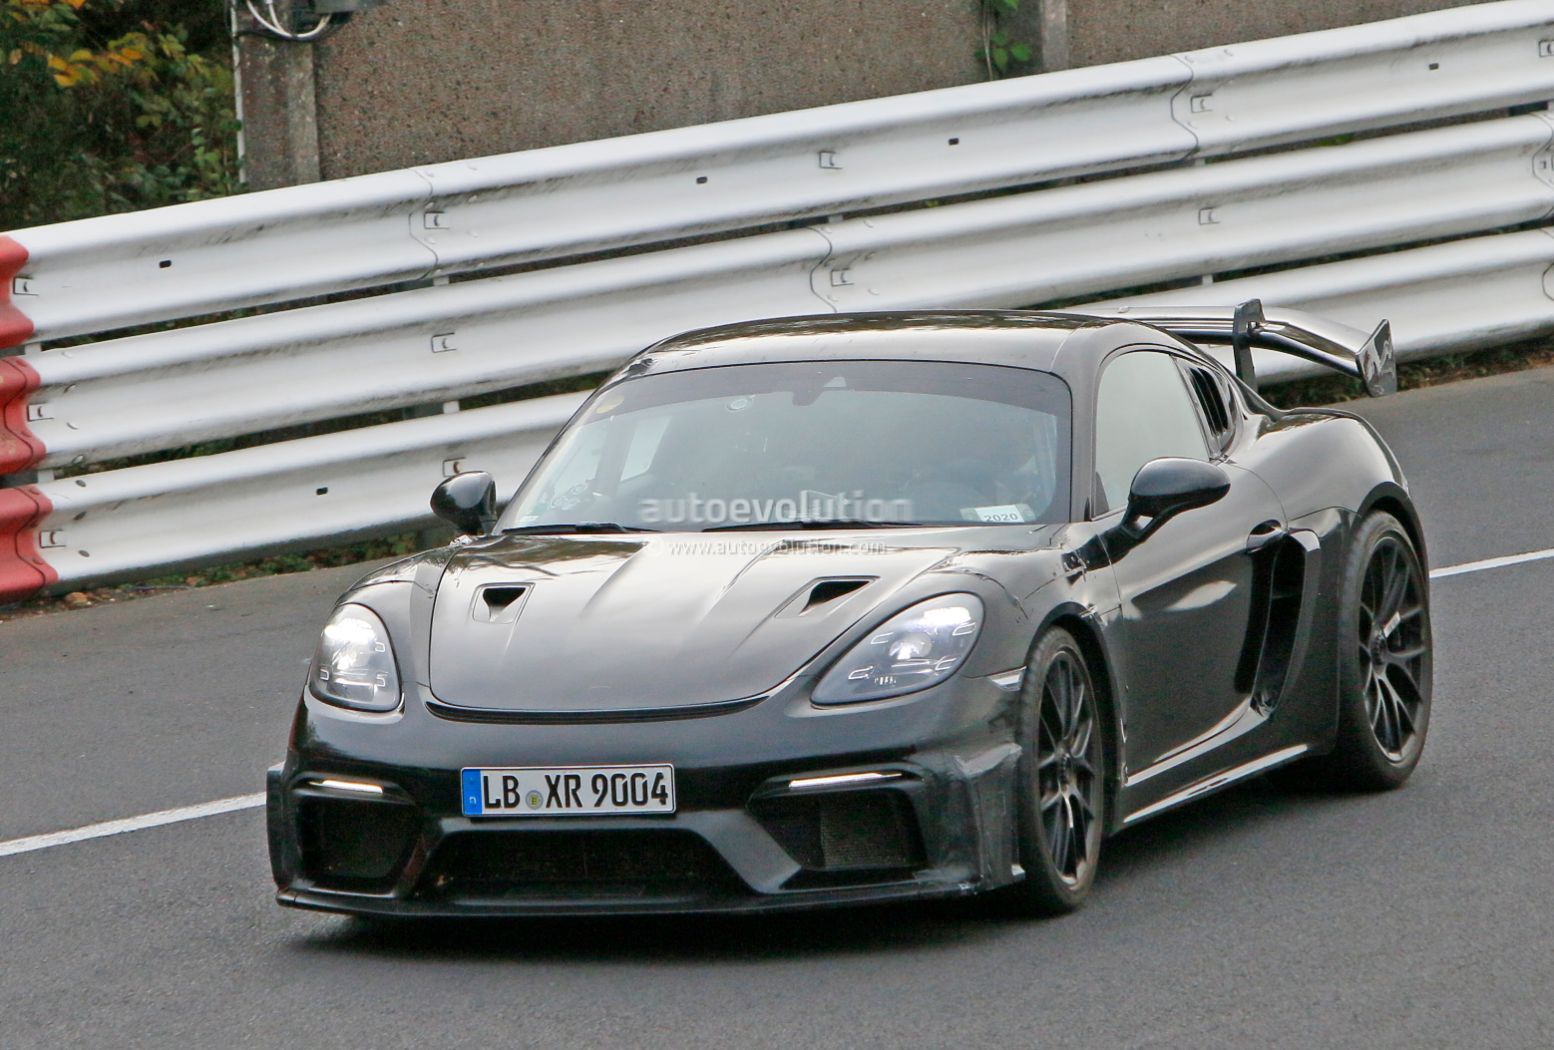 22 Porsche 718 Cayman Gt4 Rs What We Know About The Mid Engine Track Slayer Autoevolution